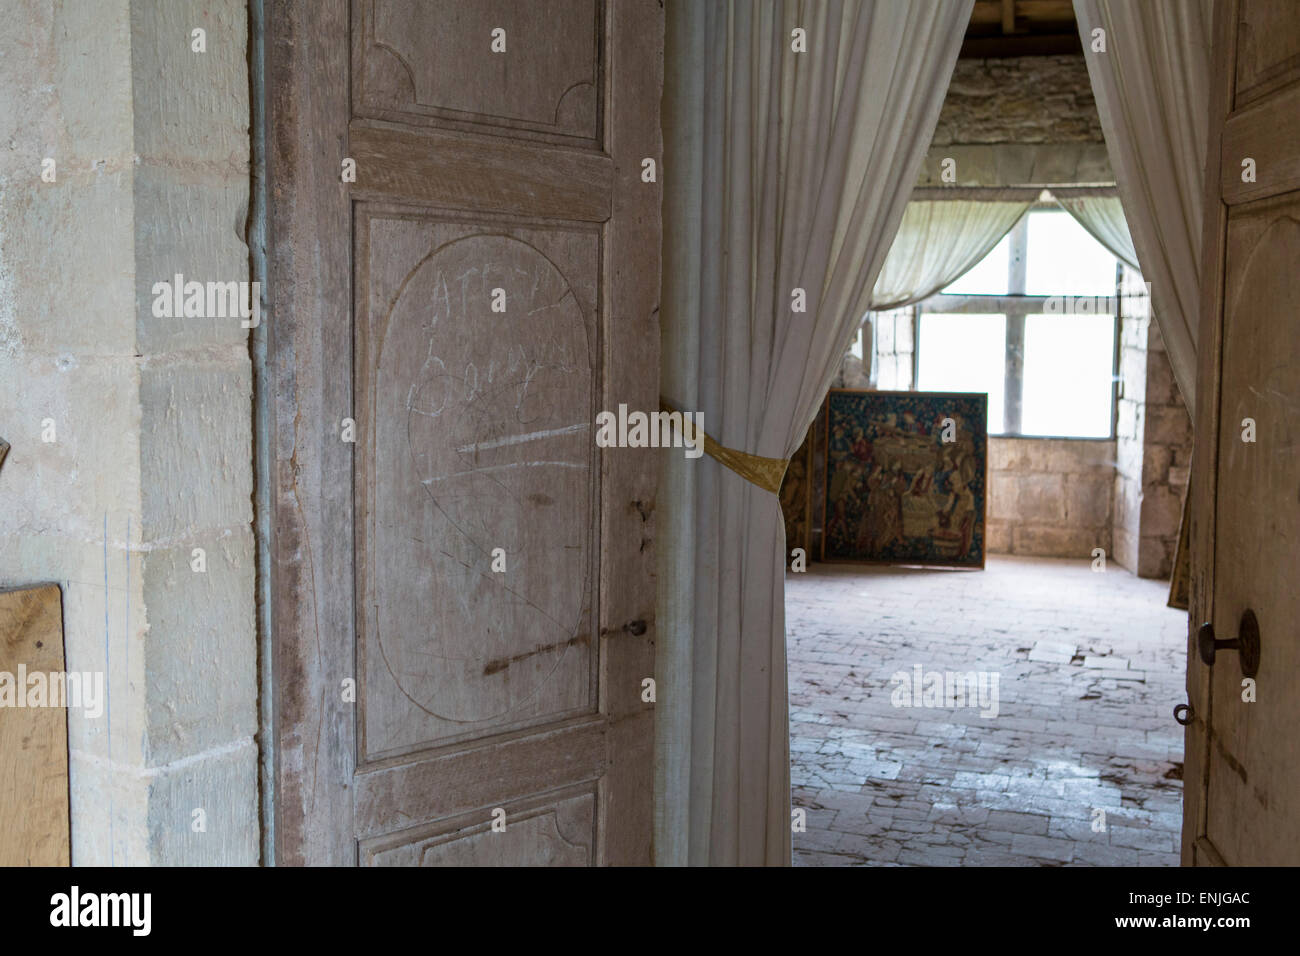 Room at medieval castle Bruniquel with doors, tapestry and curtains,Tarn et Garonne, Midi-Pyrenees, France Stock Photo